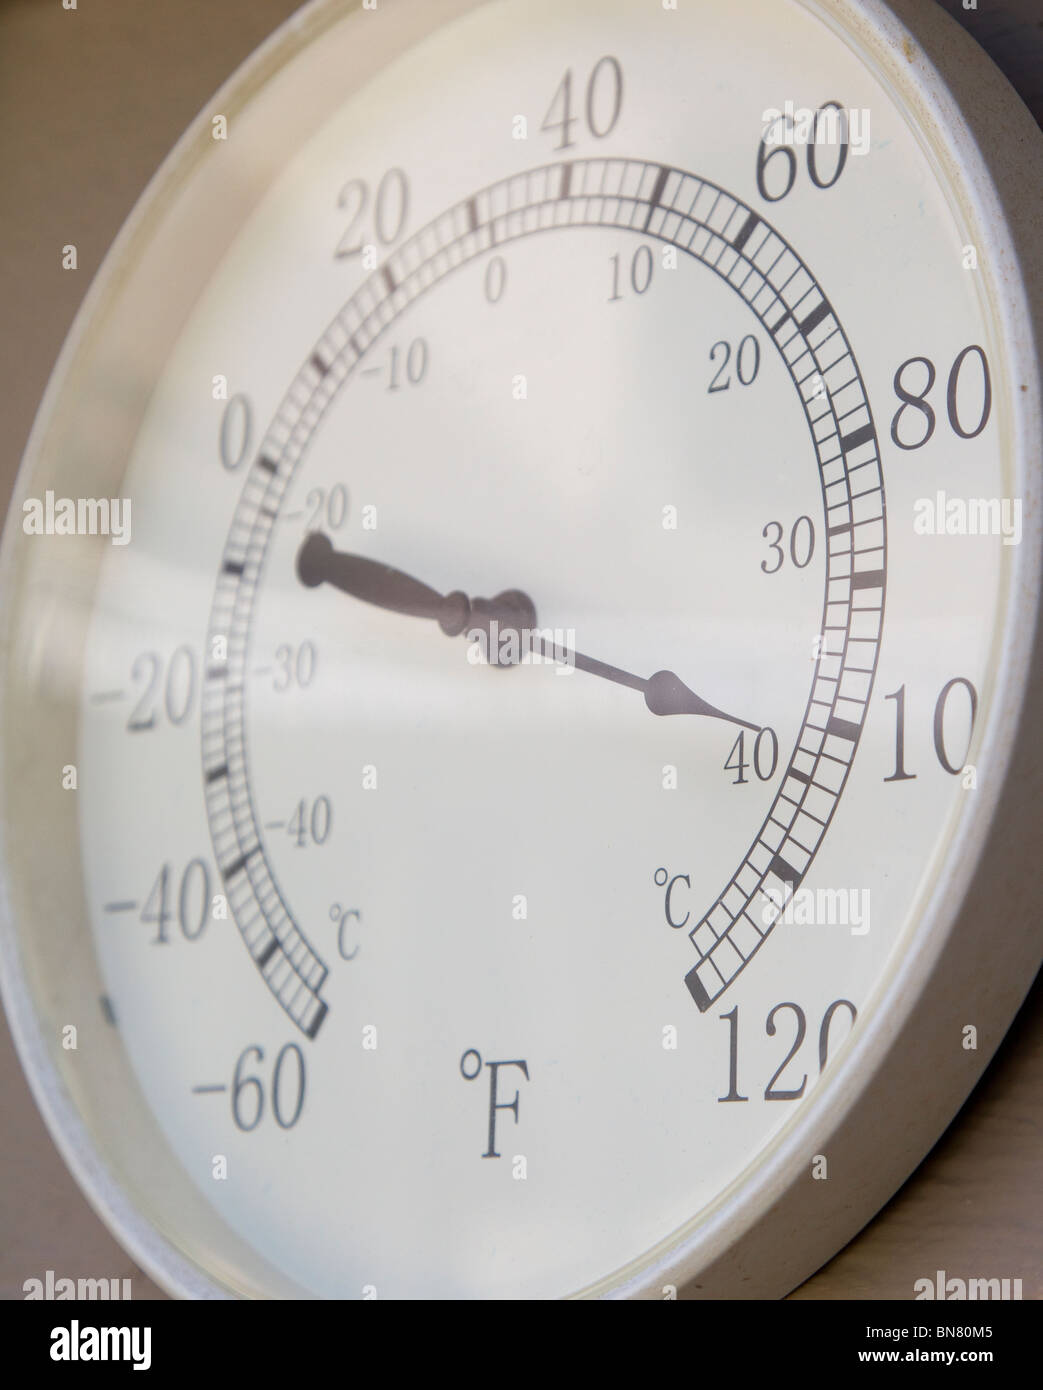 Outdoor thermometer showing 100 degree Fahrenheit temperature Stock Photo